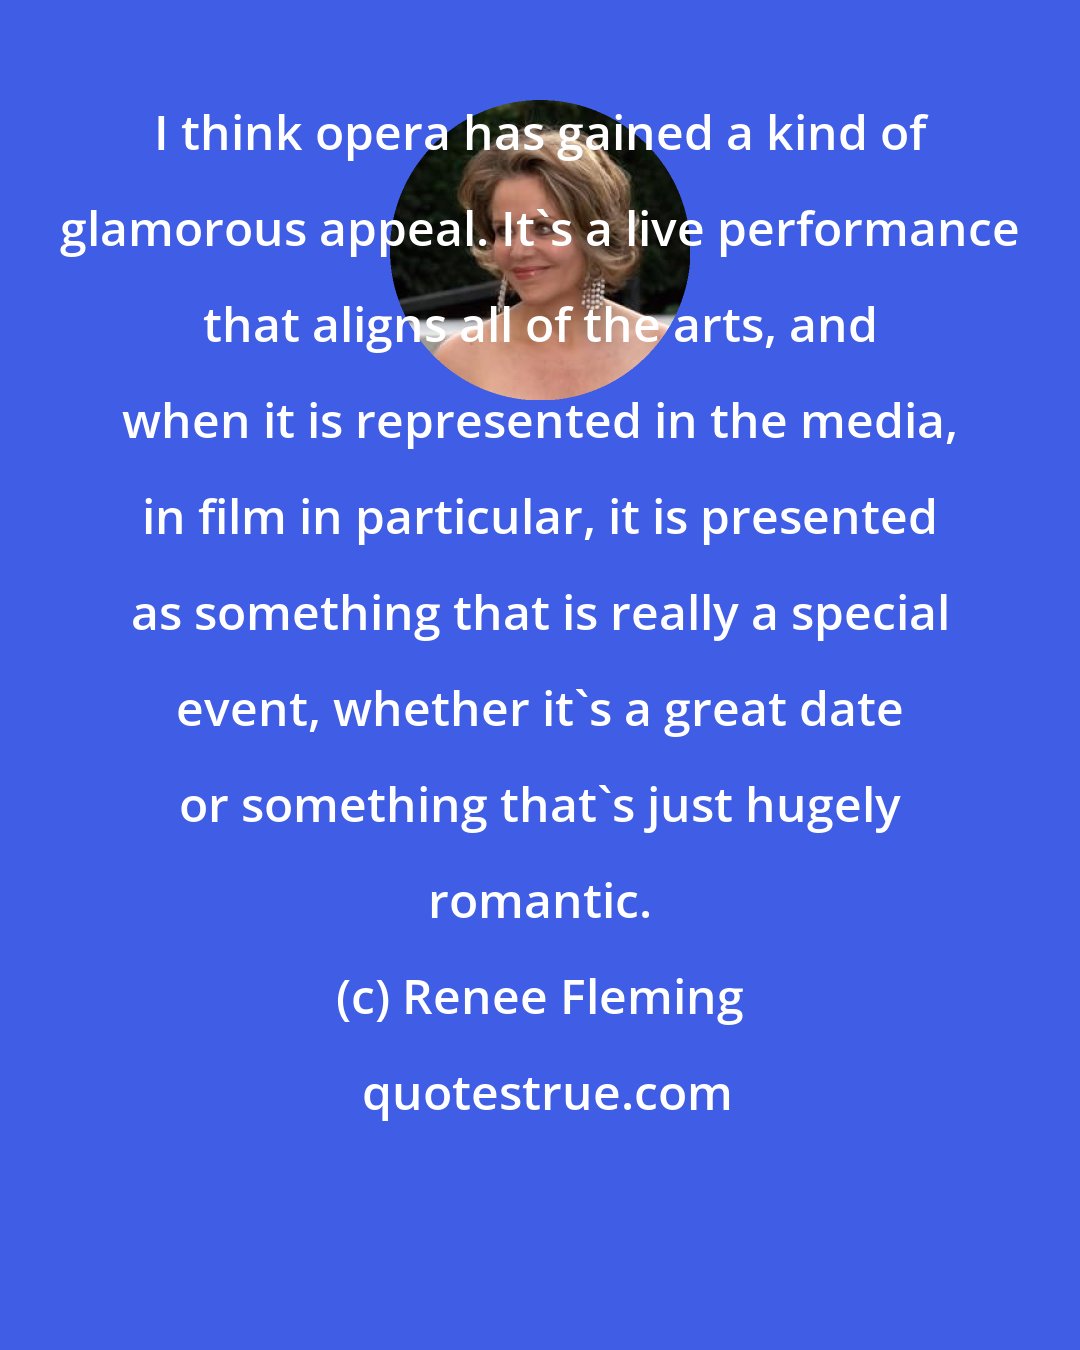 Renee Fleming: I think opera has gained a kind of glamorous appeal. It's a live performance that aligns all of the arts, and when it is represented in the media, in film in particular, it is presented as something that is really a special event, whether it's a great date or something that's just hugely romantic.